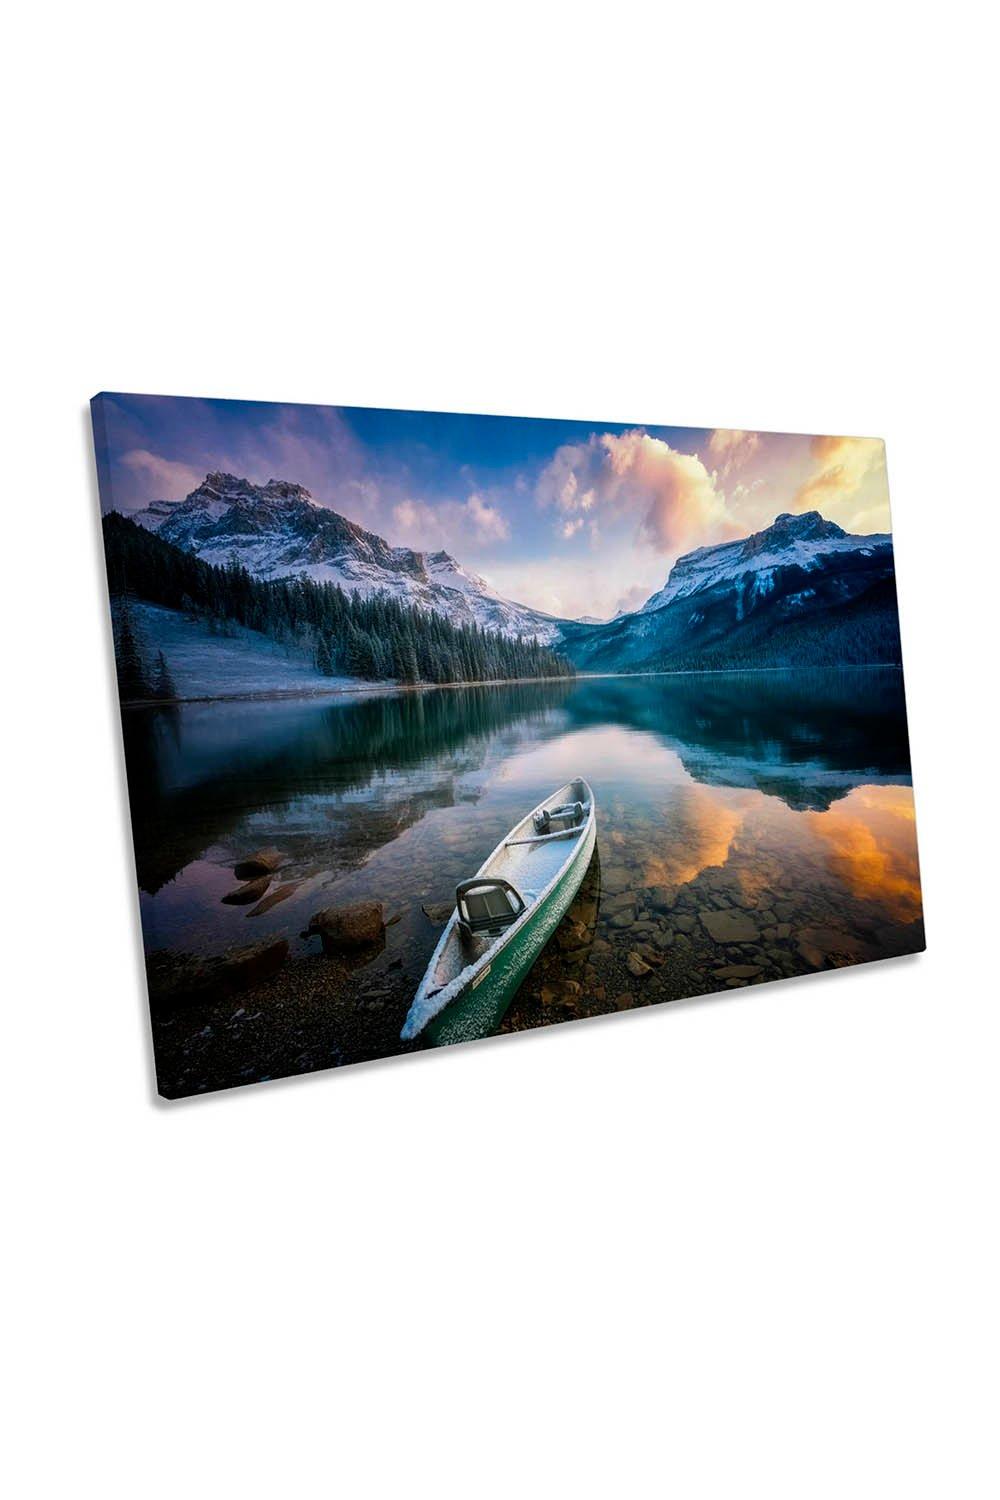 First Snow Emerald Lake Boat Banff Canada Canvas Wall Art Picture Print